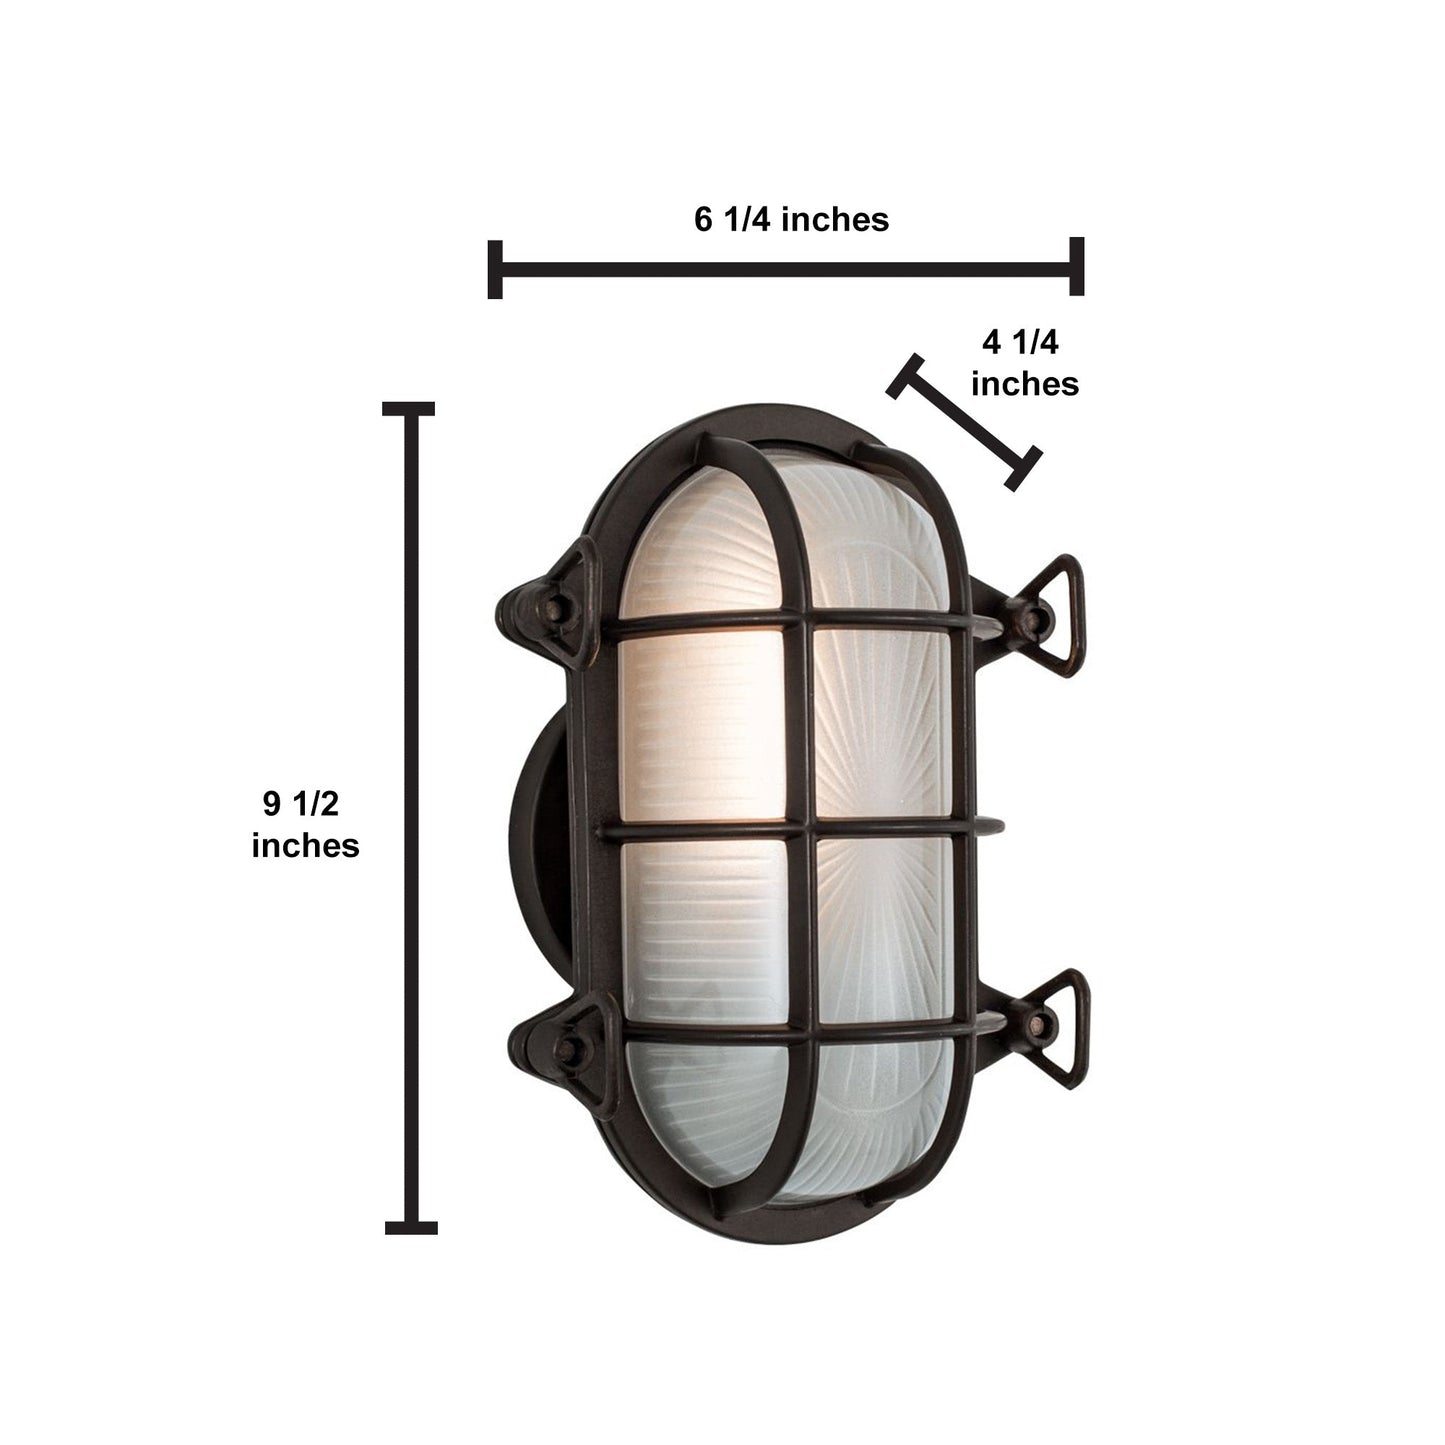 Norwell Lighting Mariner 10" x 6" 1-Light Oval Bronze Outdoor Wall Light With Frosted Glass Diffuser